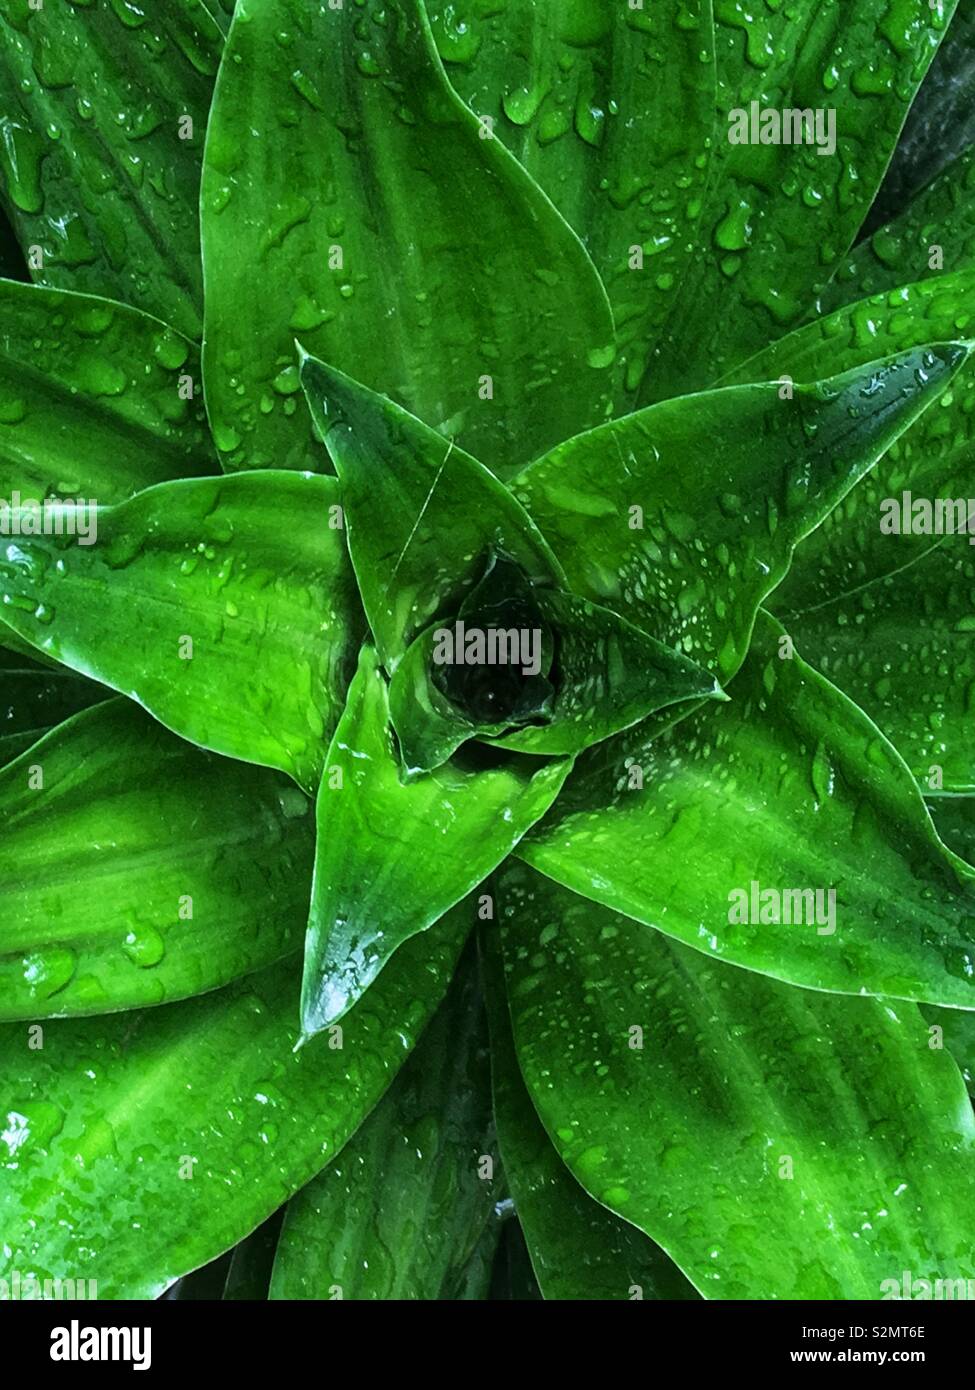 Full frame of a Janet Craig dracaena plant with rain drops on its leaves. Stock Photo